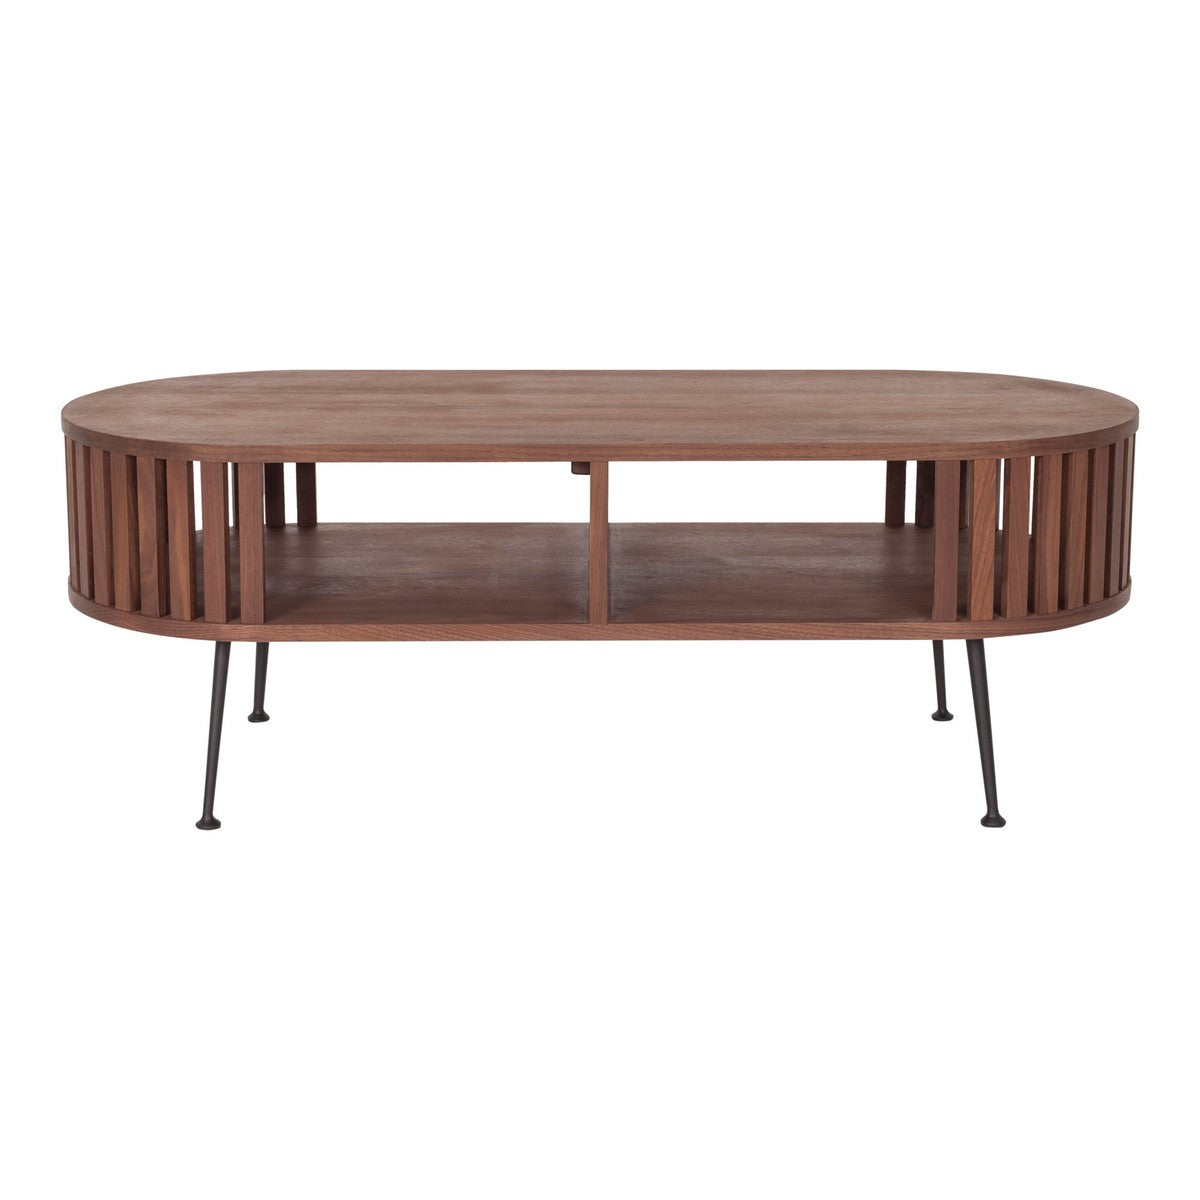 Moe's Home Collection Henrich Coffee Table Natural Oil - YC-1025-21 - Moe's Home Collection - Coffee Tables - Minimal And Modern - 1